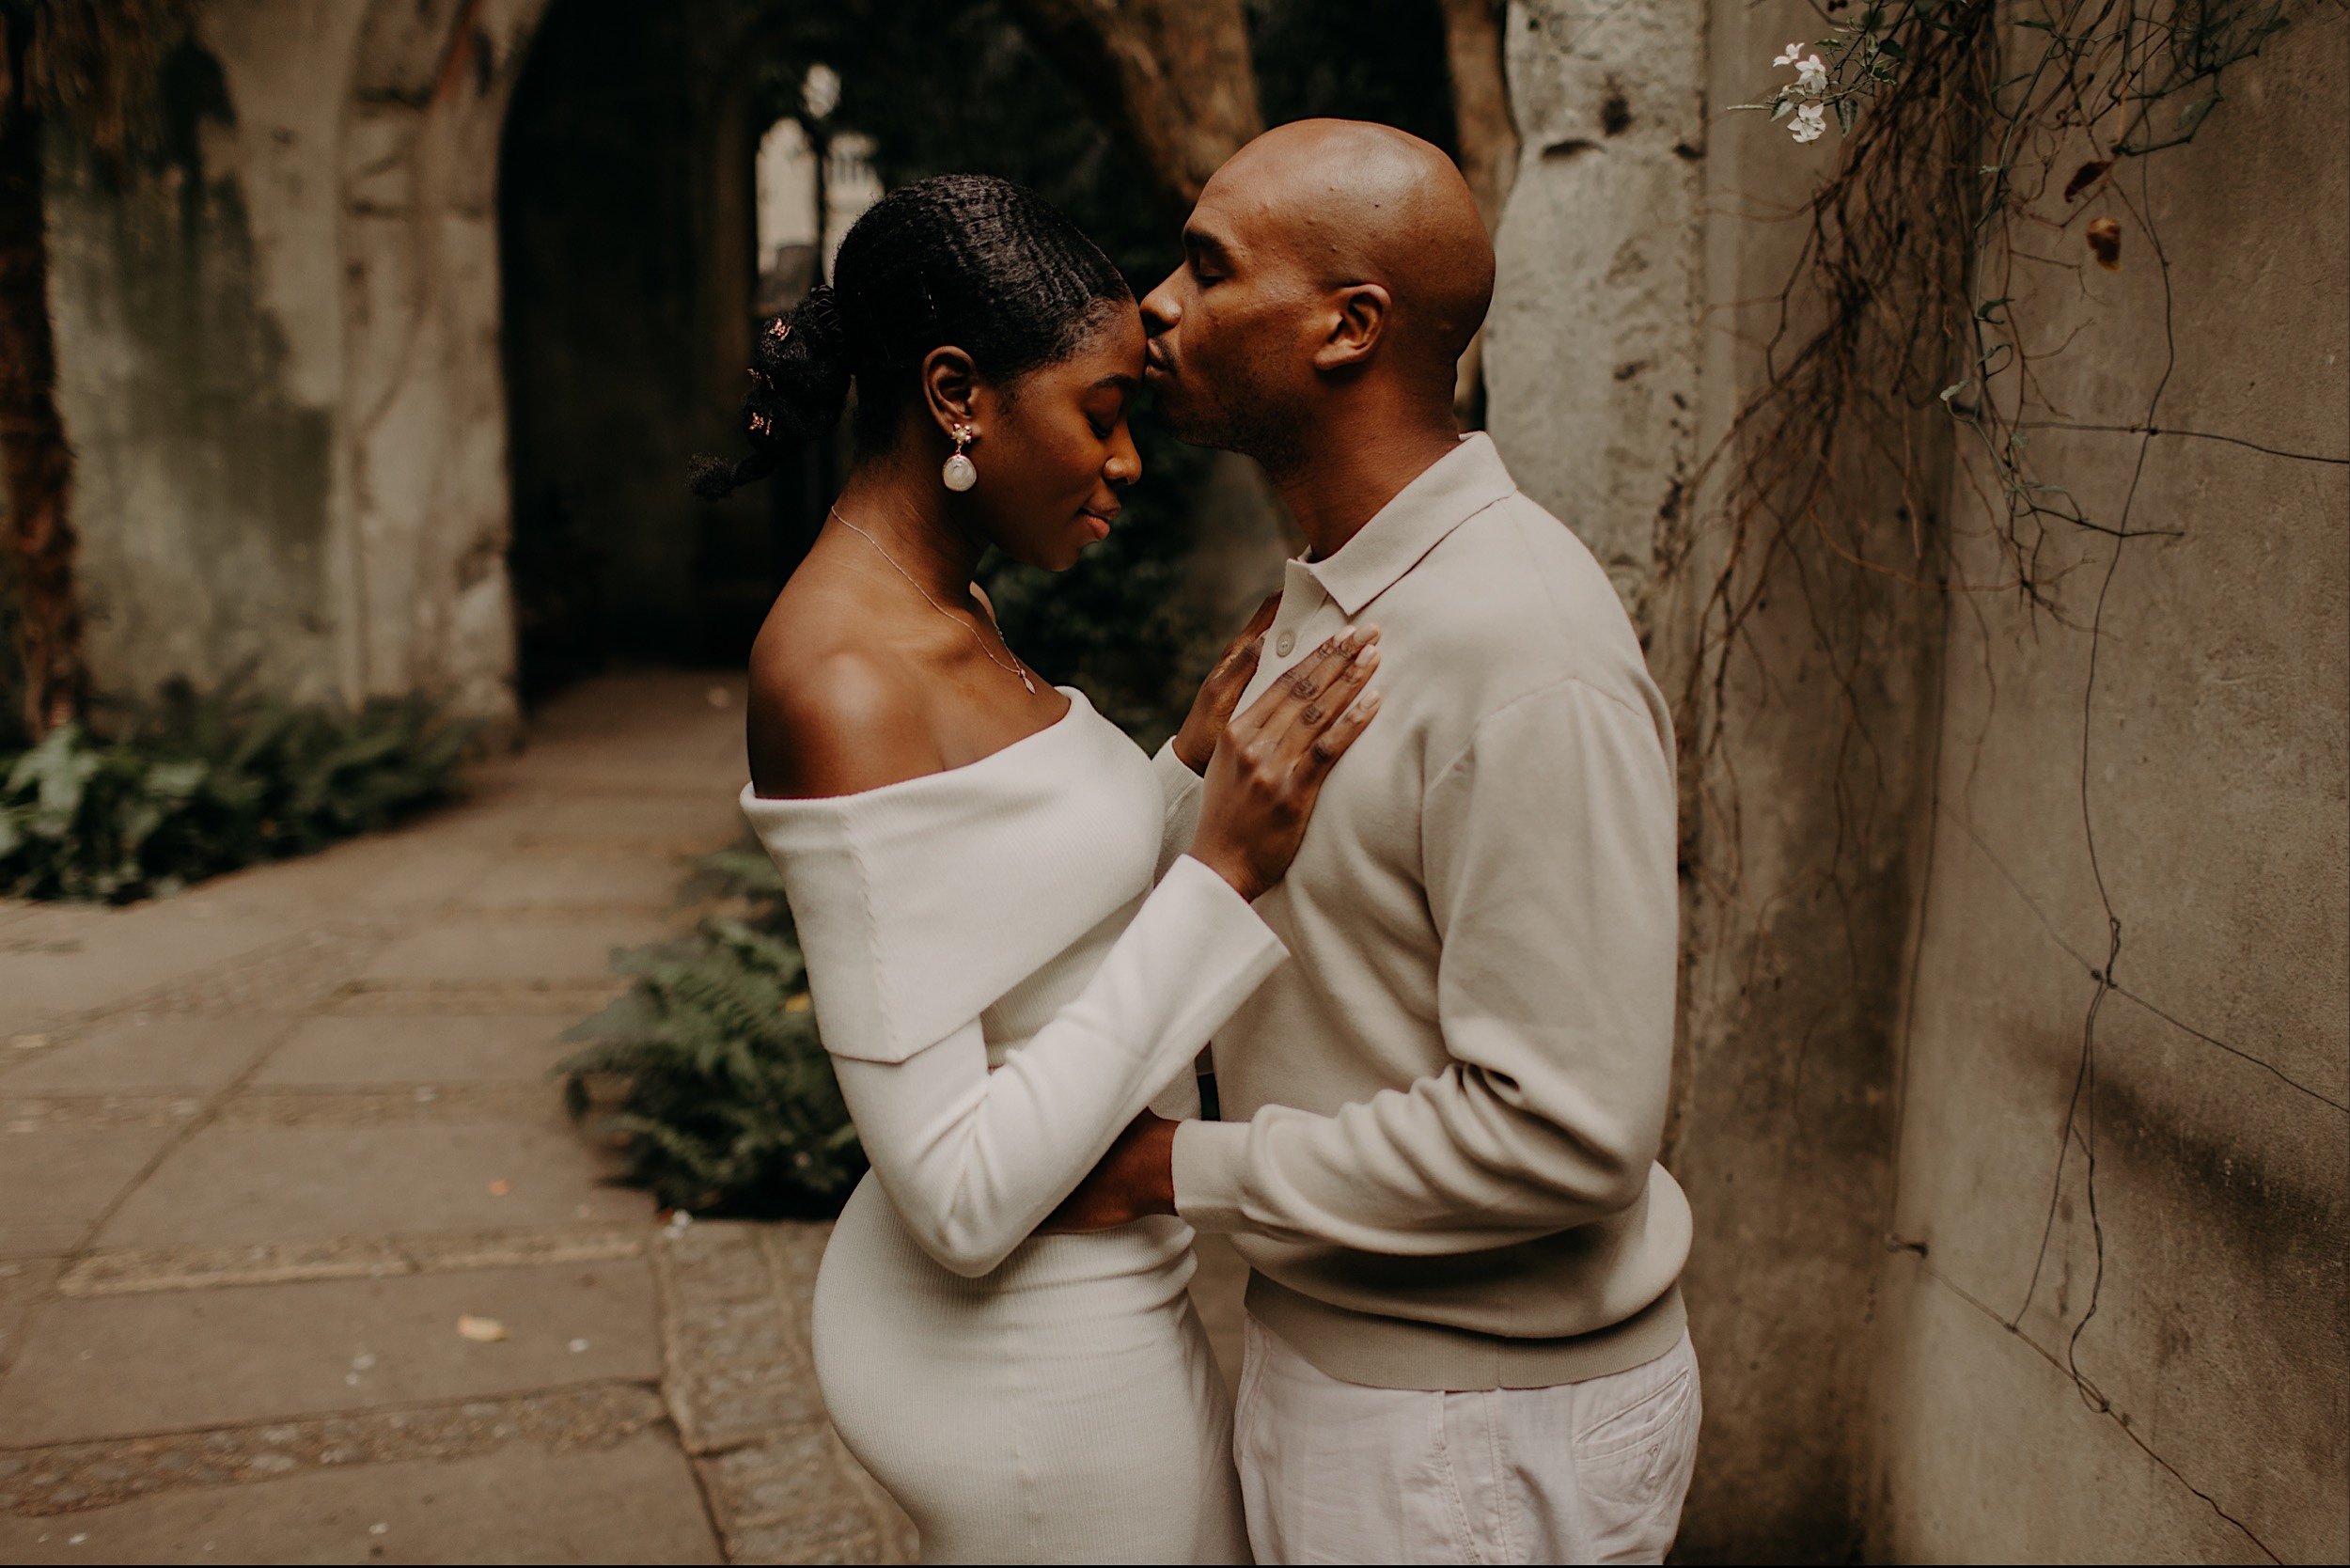 12_St-Dunstans-in-the-east-pre-wedding-shoot0017_Gorgeous black model couple in love share intimate moment in st dunstan in the east.jpg